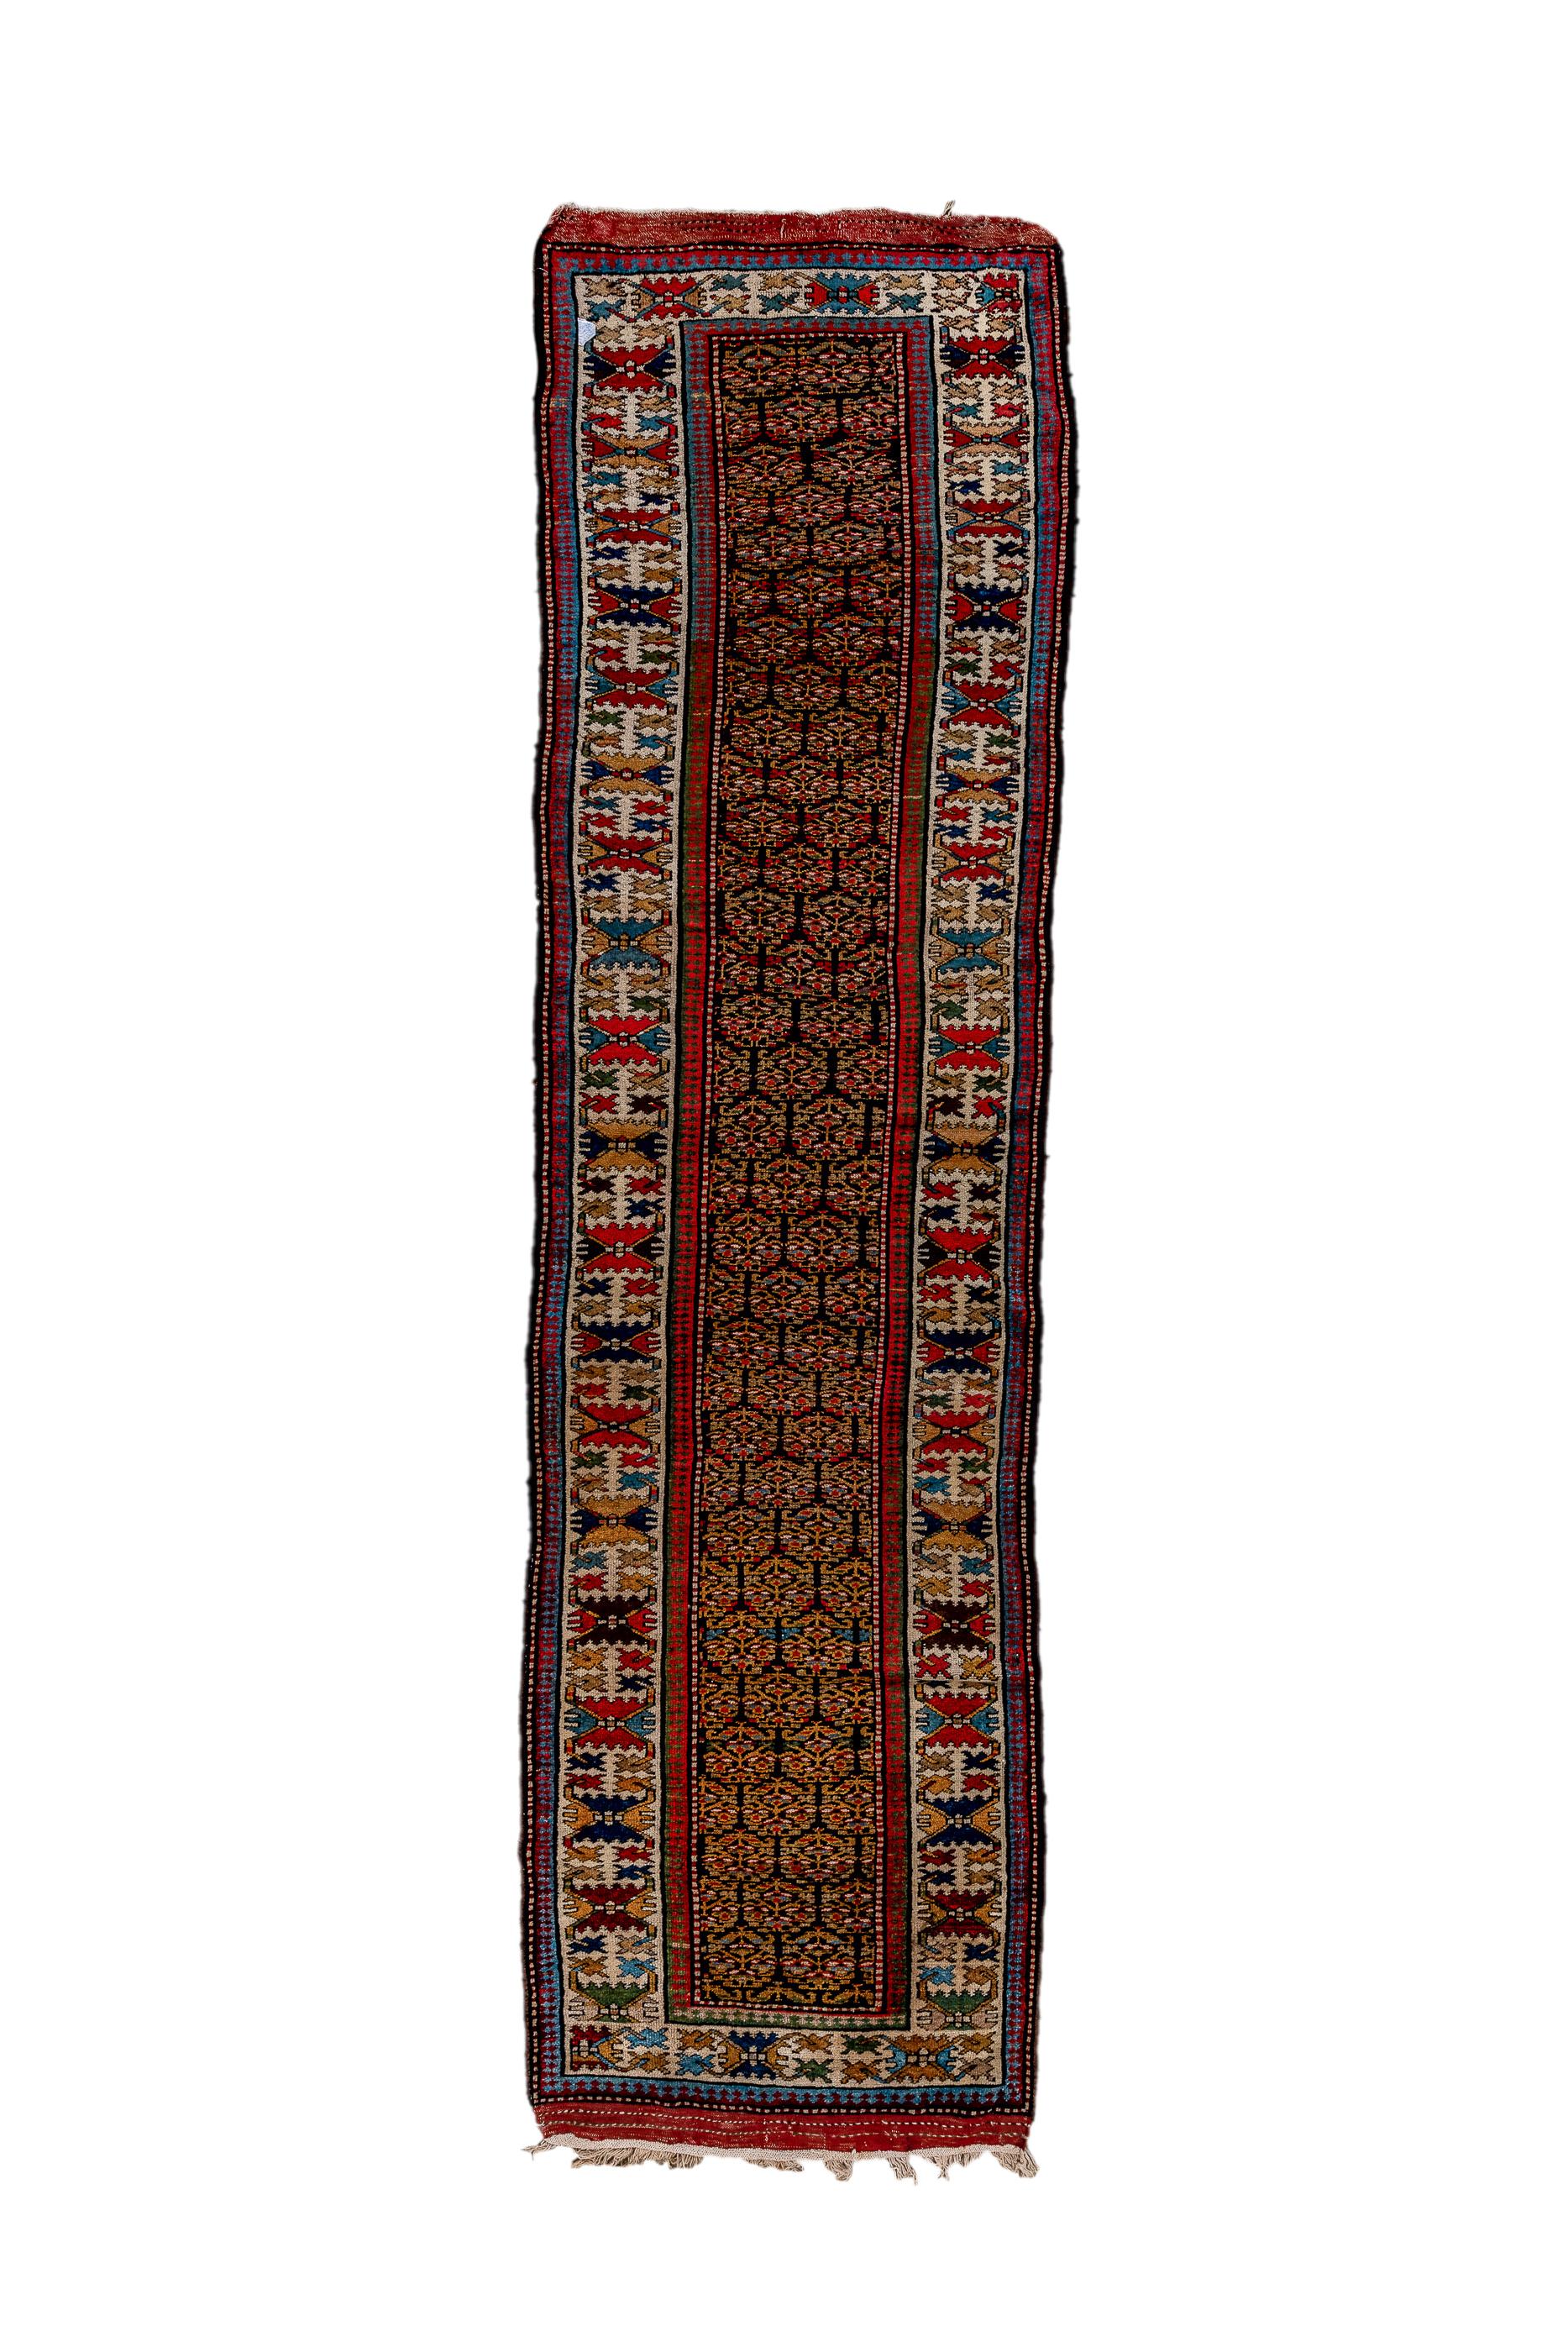 This Kurdish west Persian village runner shows a dark brown field covered with half drop rows of stylized, openwork flowers in the characteristic Kurdish style. The ecru  main border exhibits a version of the “crab” pattern with red or goldenrod